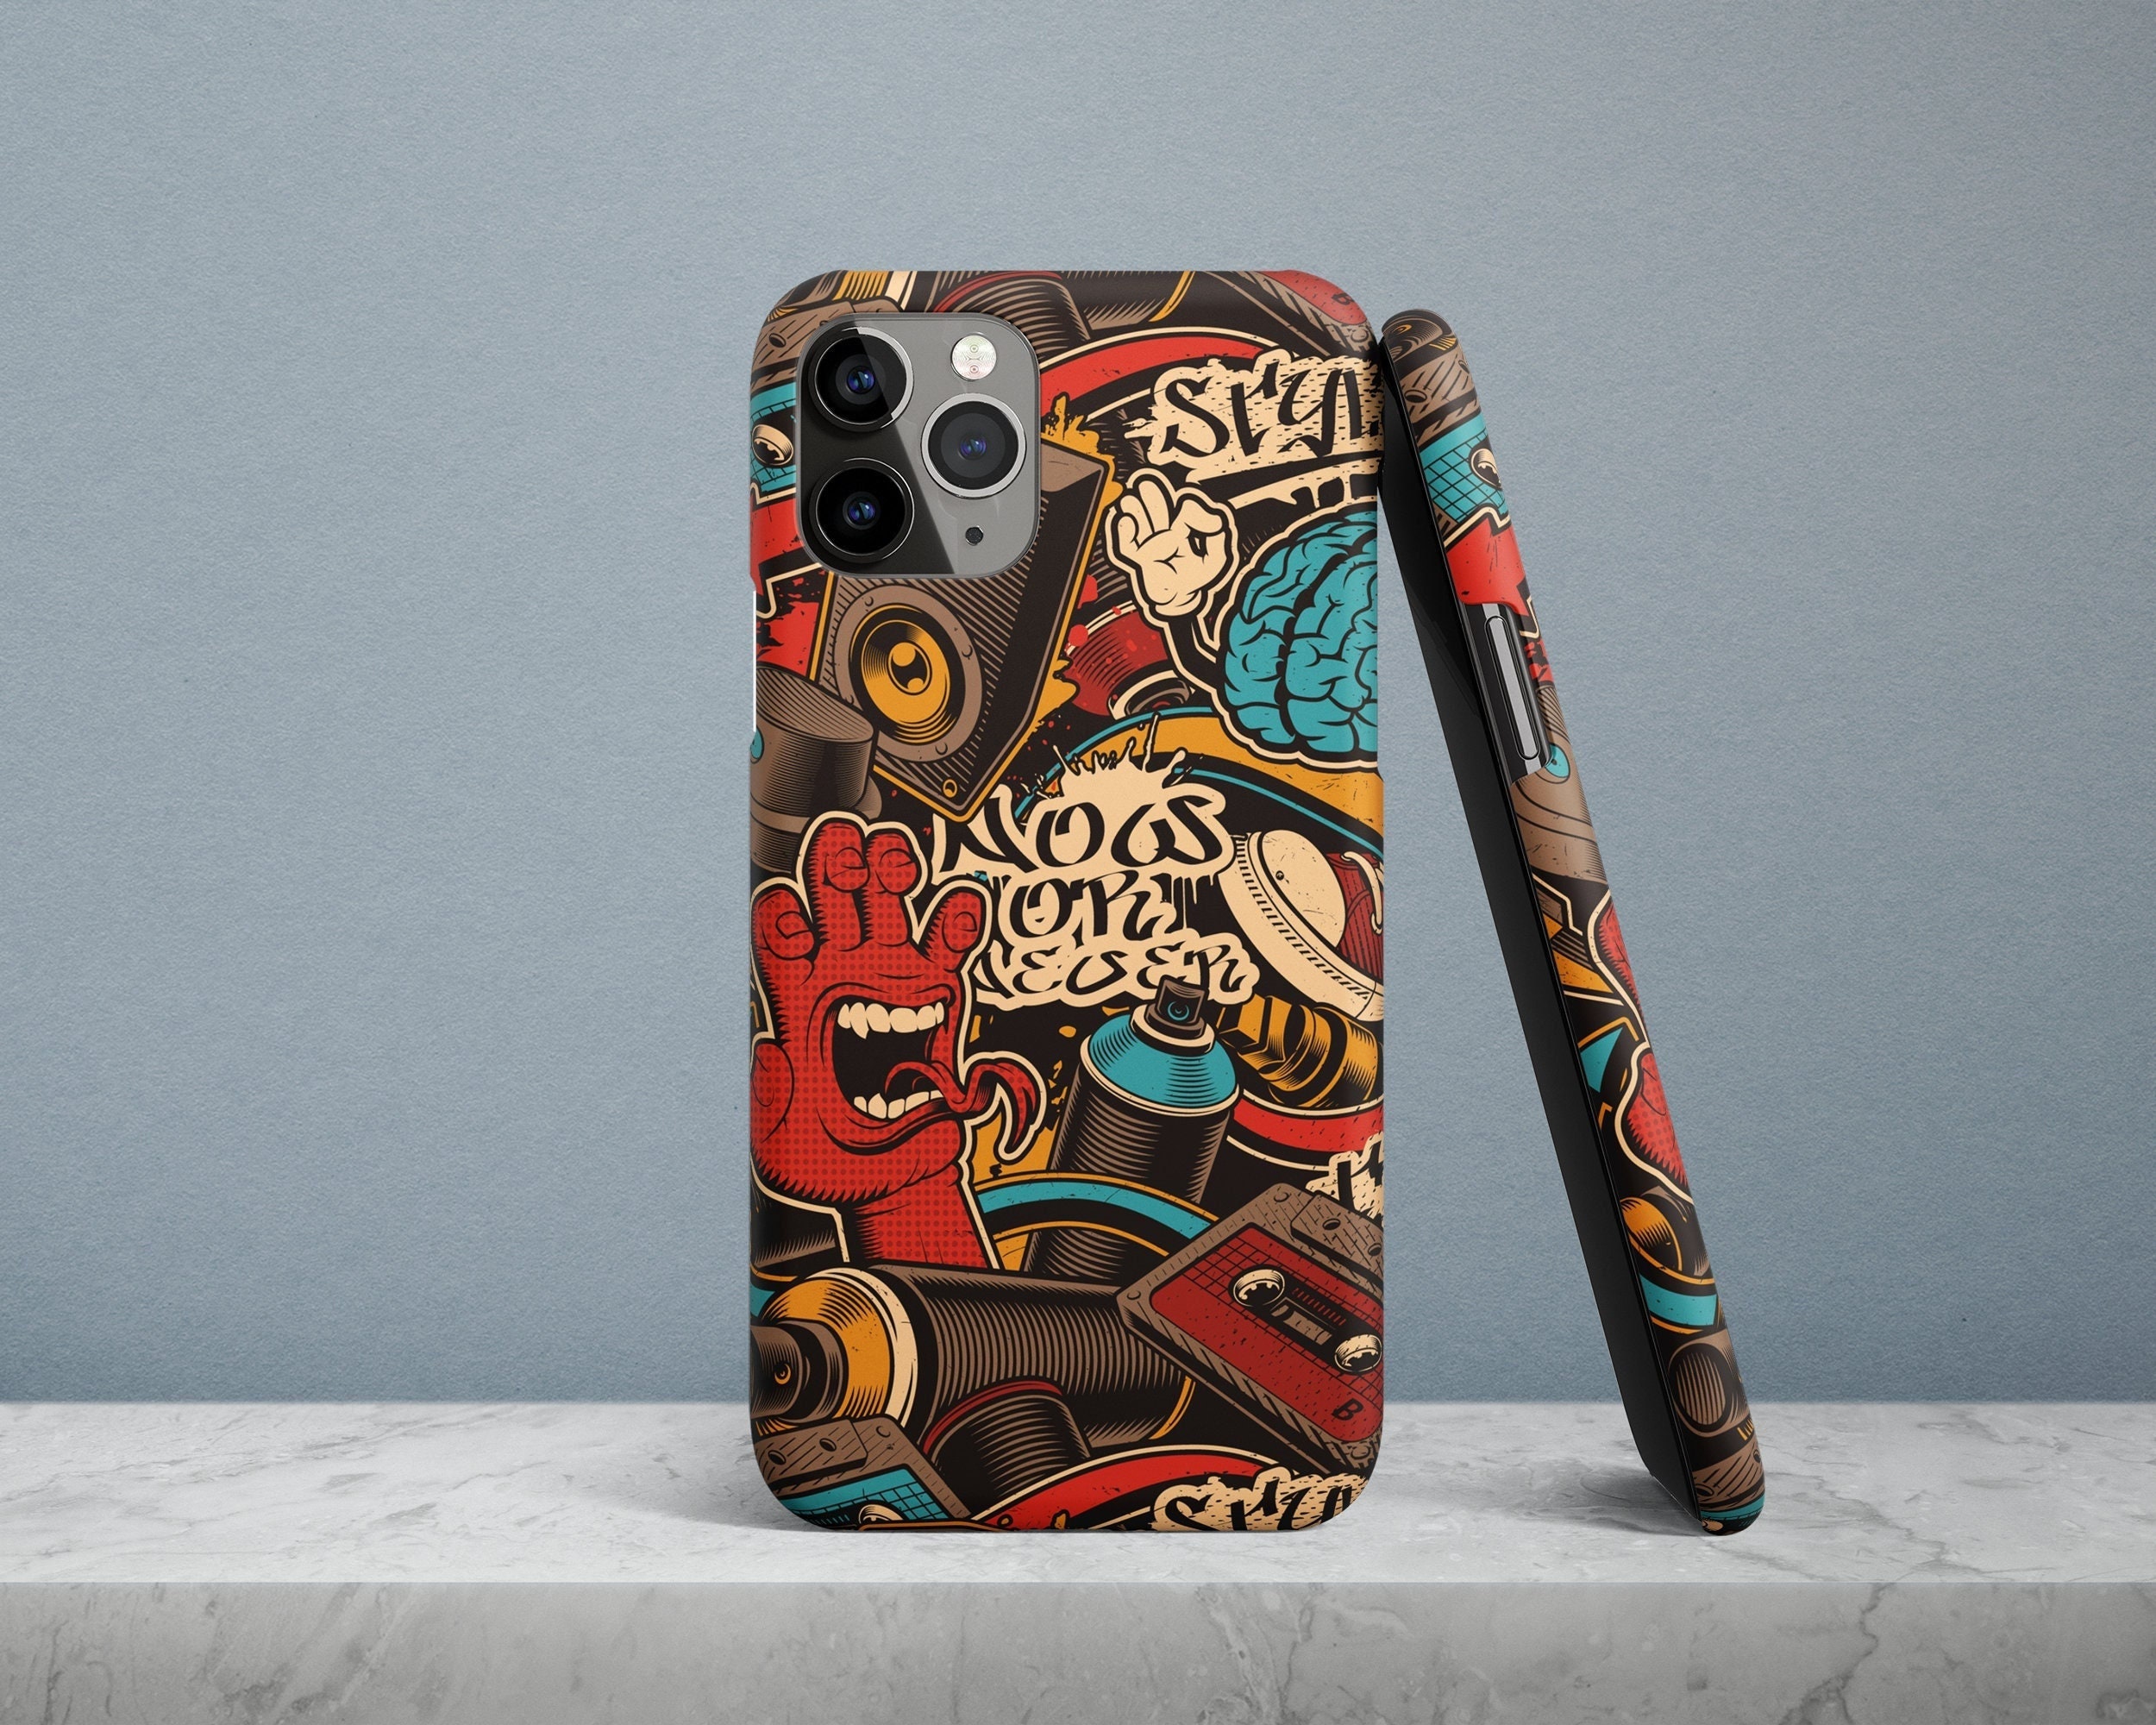 FIRST AID KIT - Utility Sticker In Graffiti Style iPhone Case for